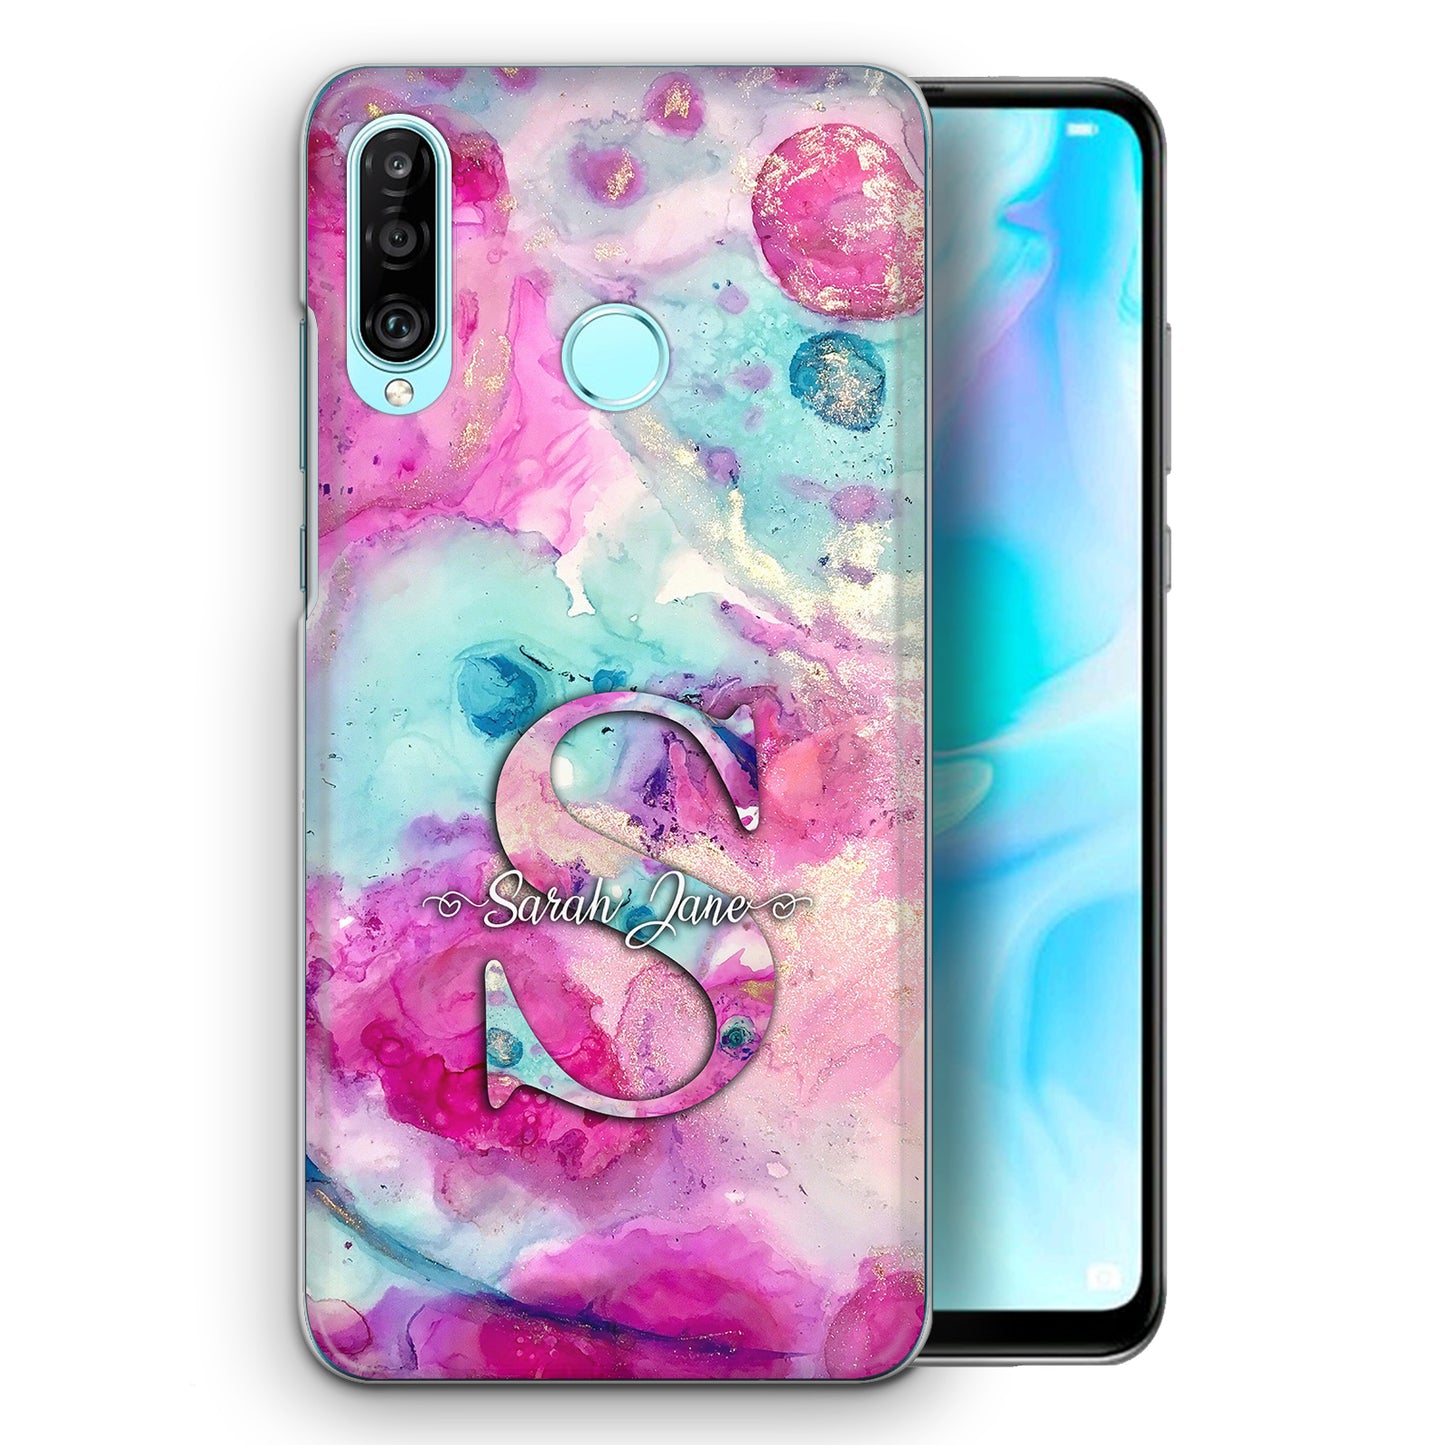 Personalised Huawei Phone Hard Case with Textured Monogram and Name on Pink Swirl Marble